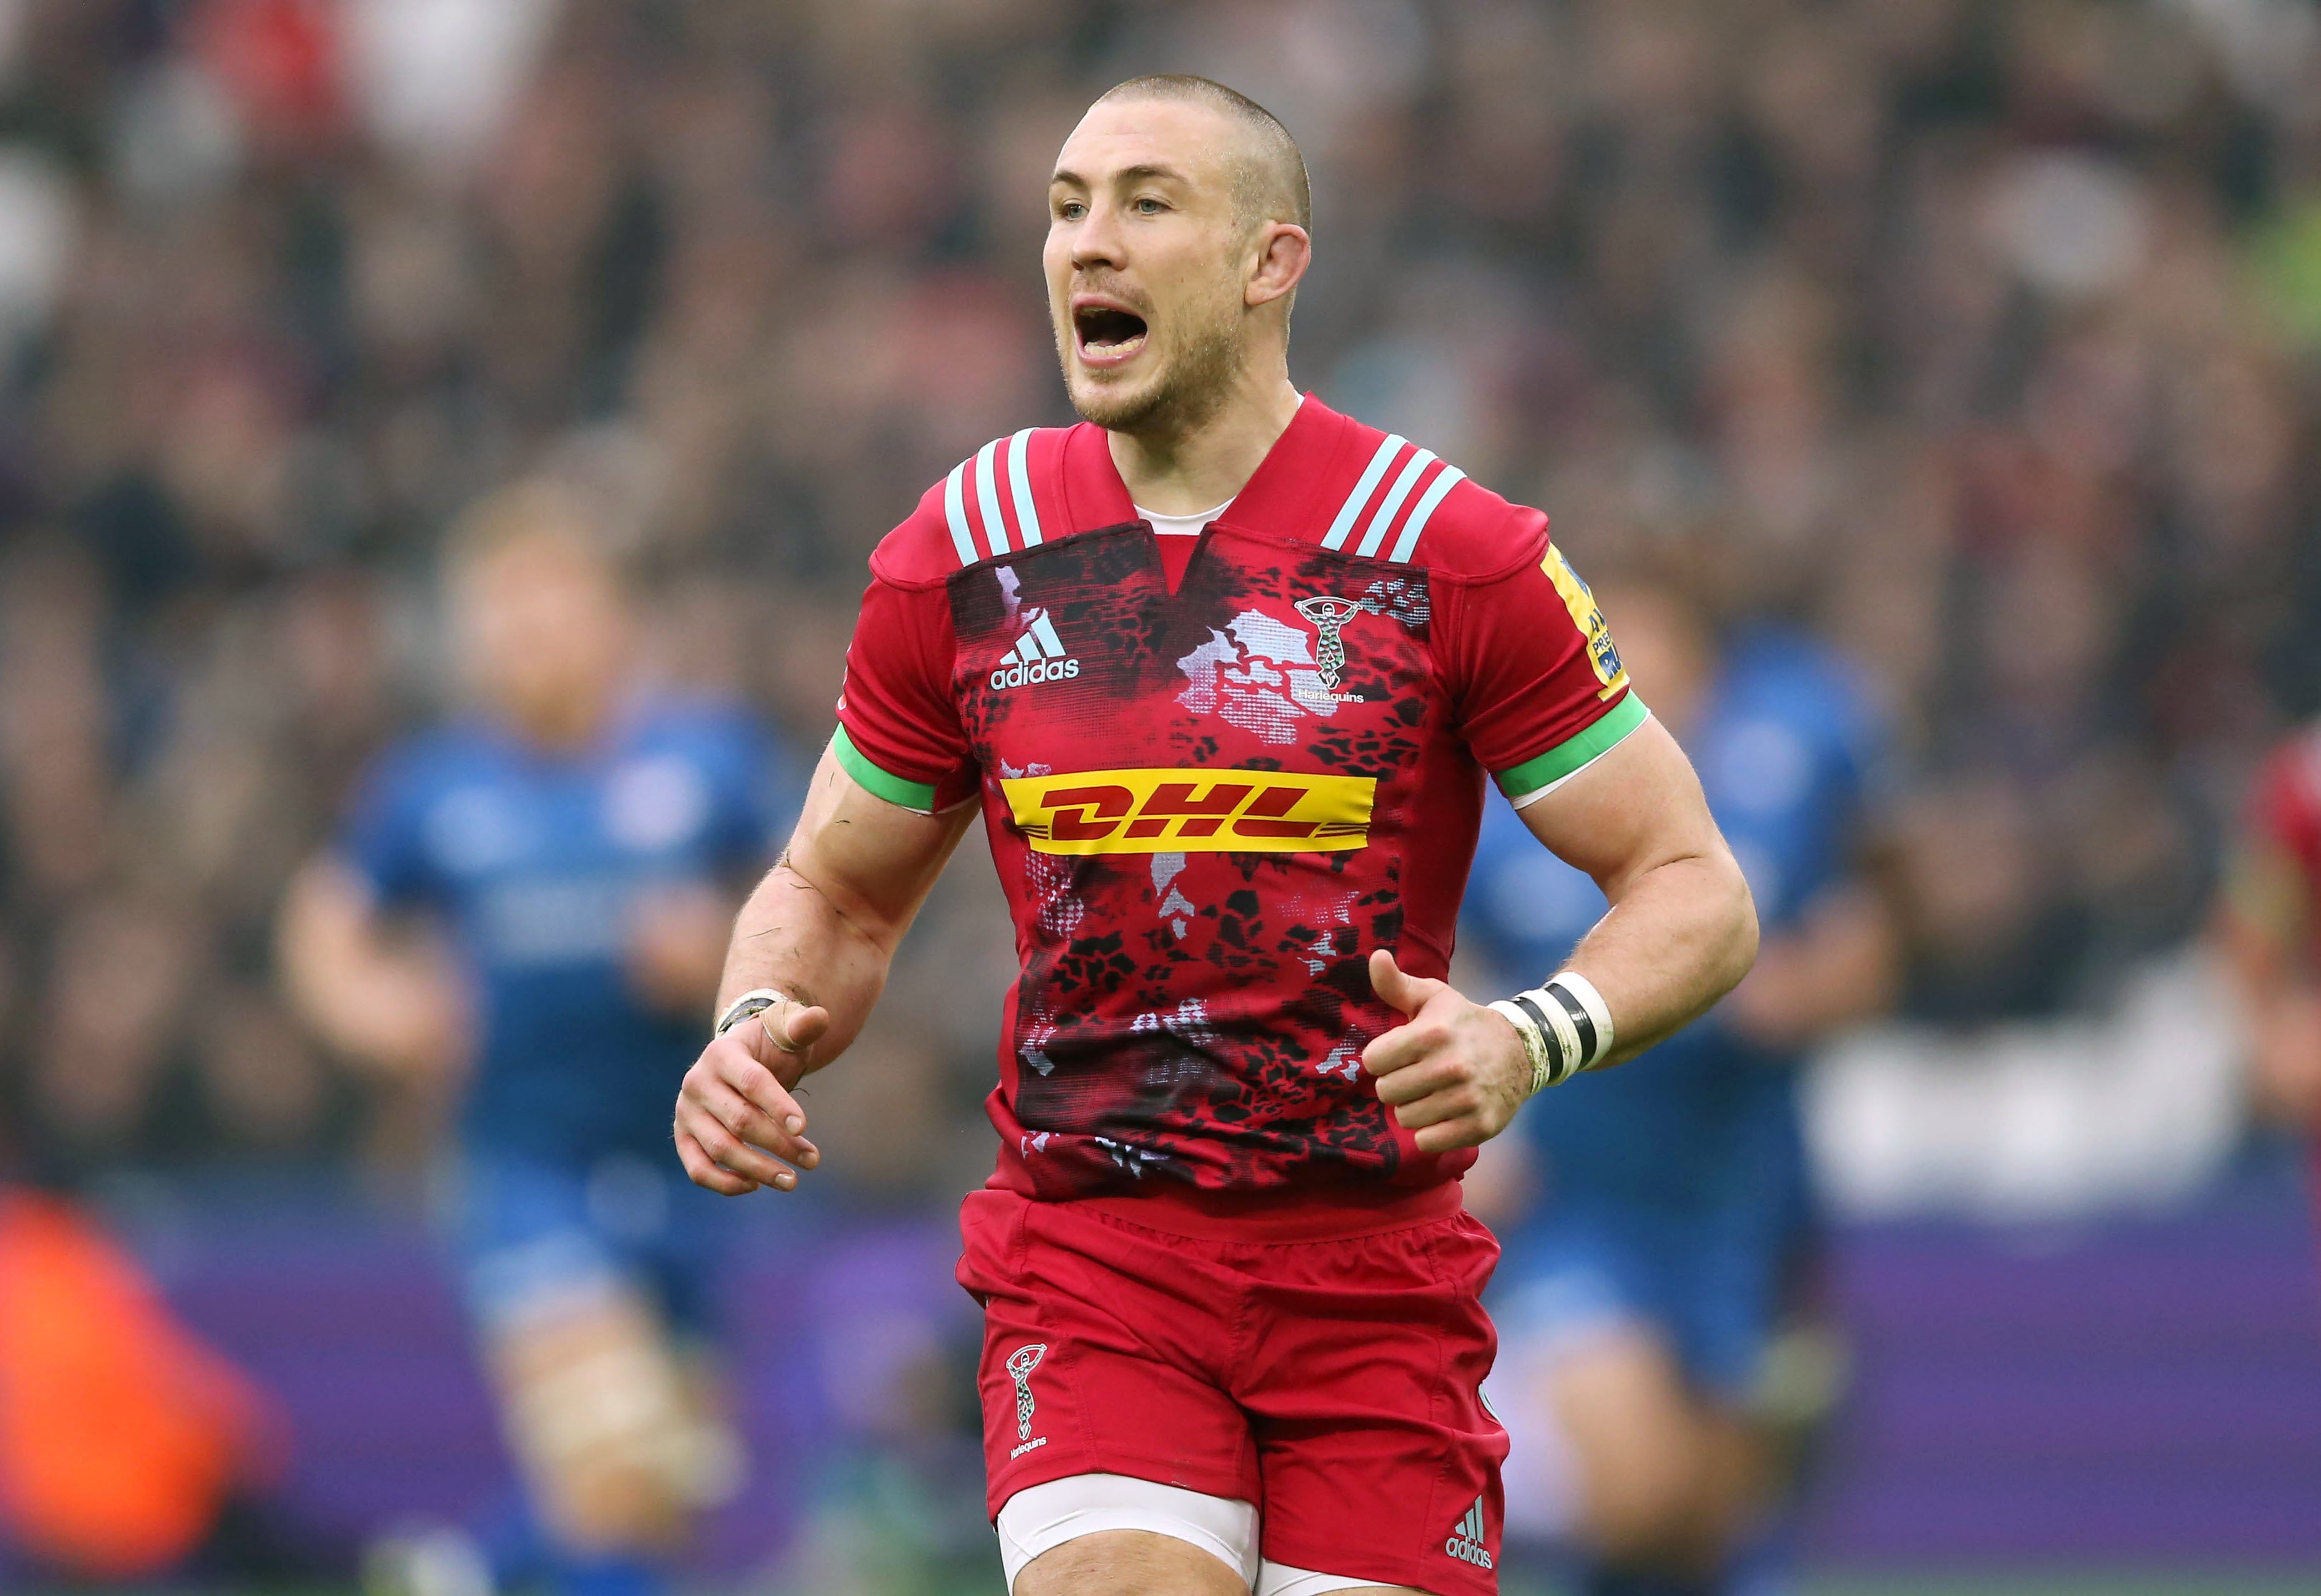 Mike Brown has played his last game for Harlequins